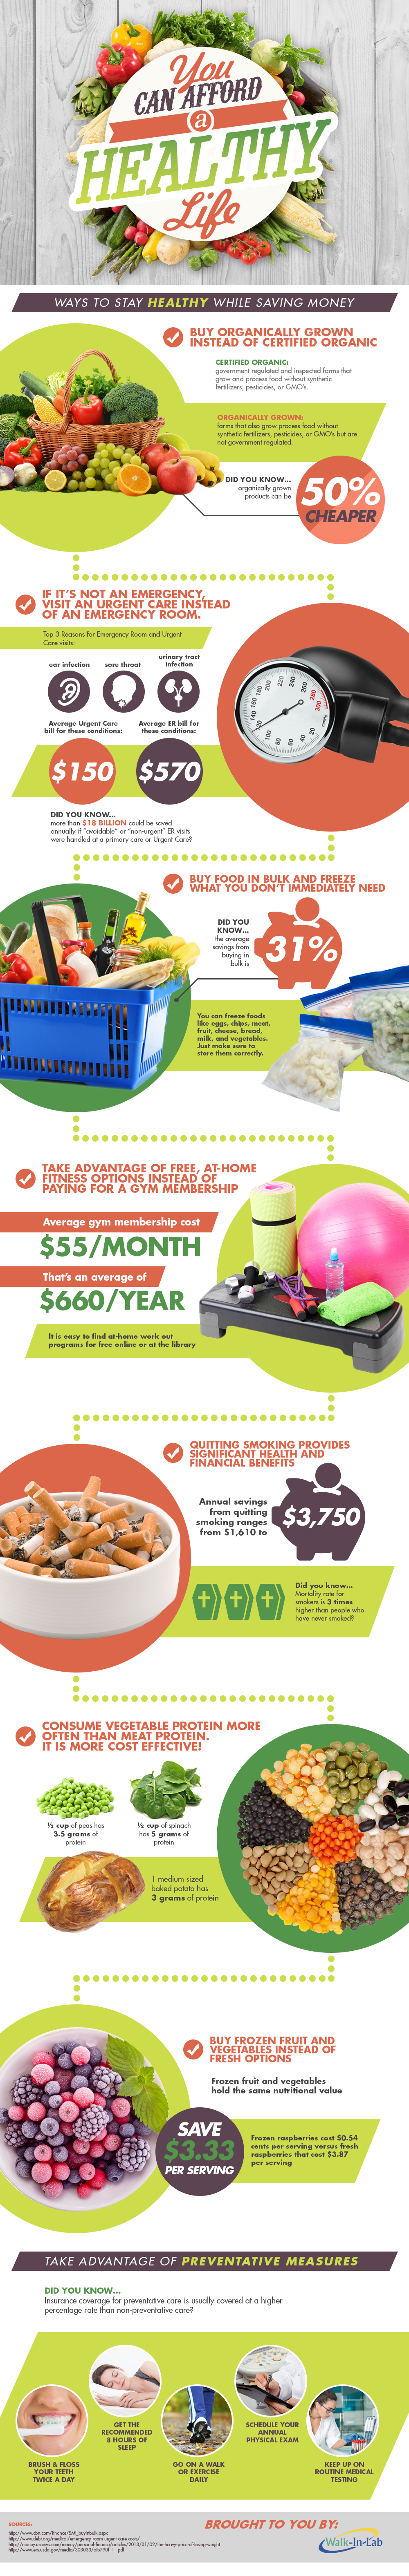 Being Healthy Doesn’t Have To Be Expensive Infographic